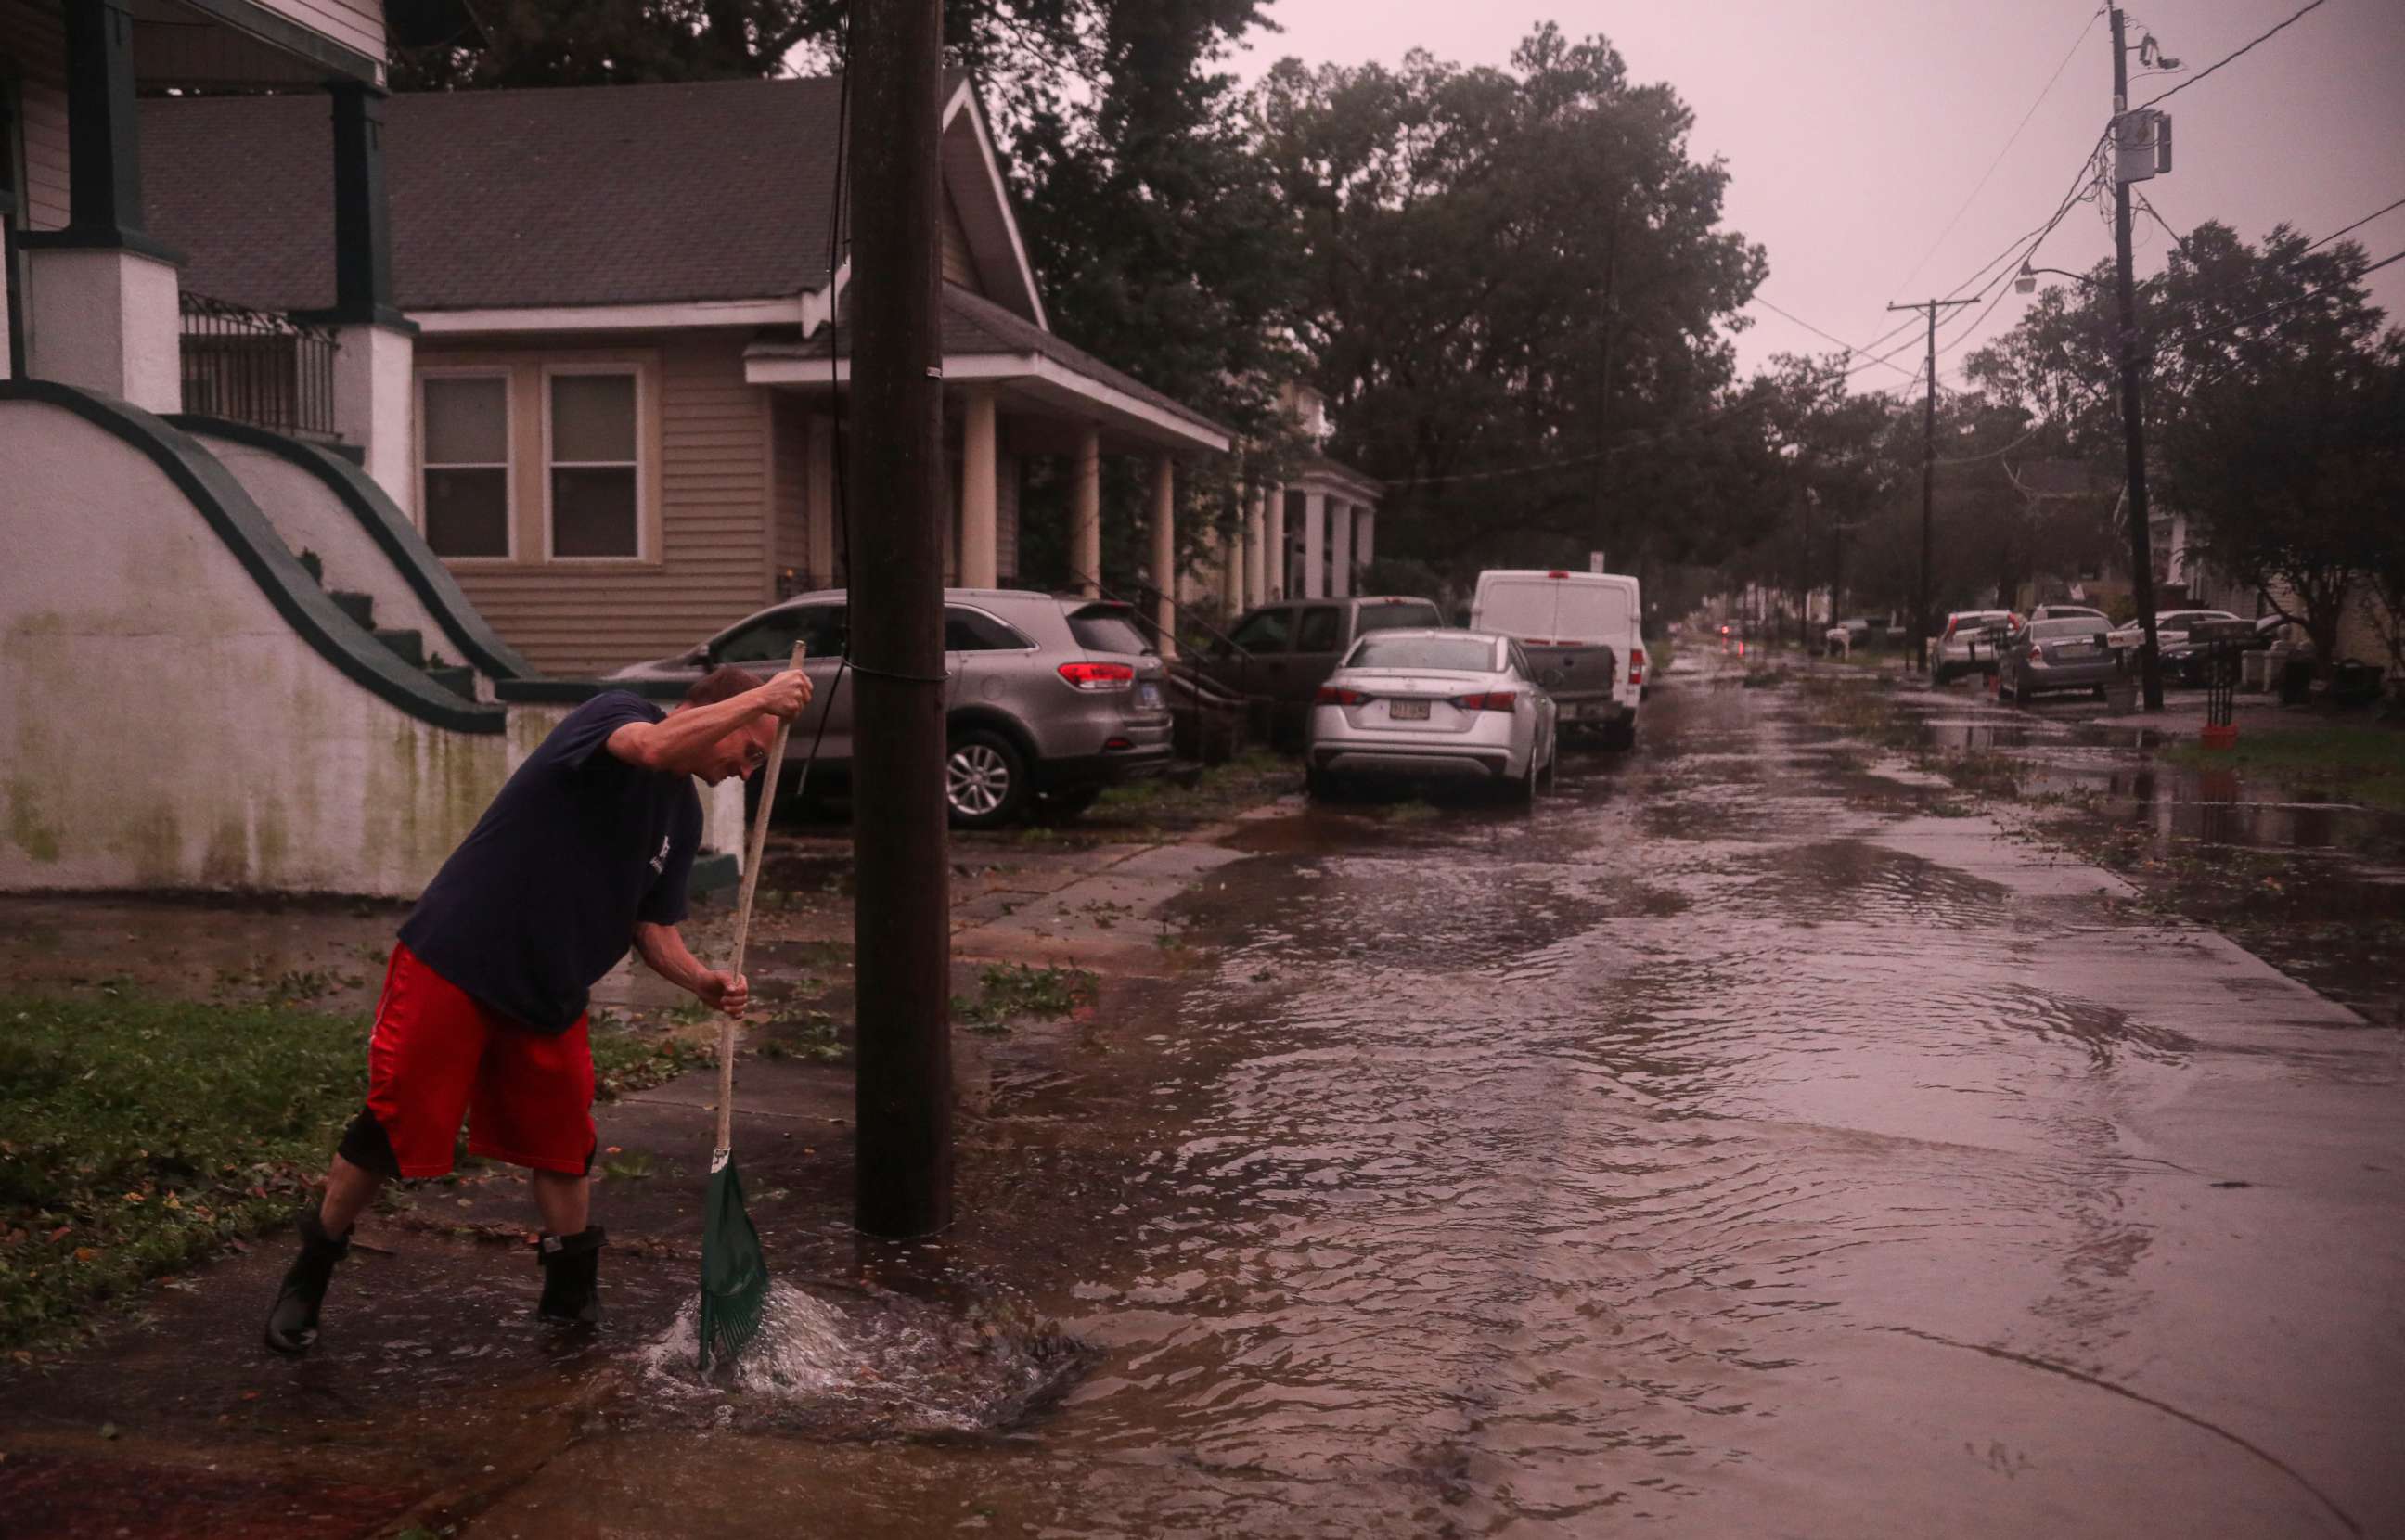 PHOTO: A resident clears storm drains after the eye of Hurricane Zeta passes over on Oct. 28, 2020, in Arabi, La. A record seven hurricanes have hit the Gulf Coast in 2020, bringing prolonged destruction to the area.